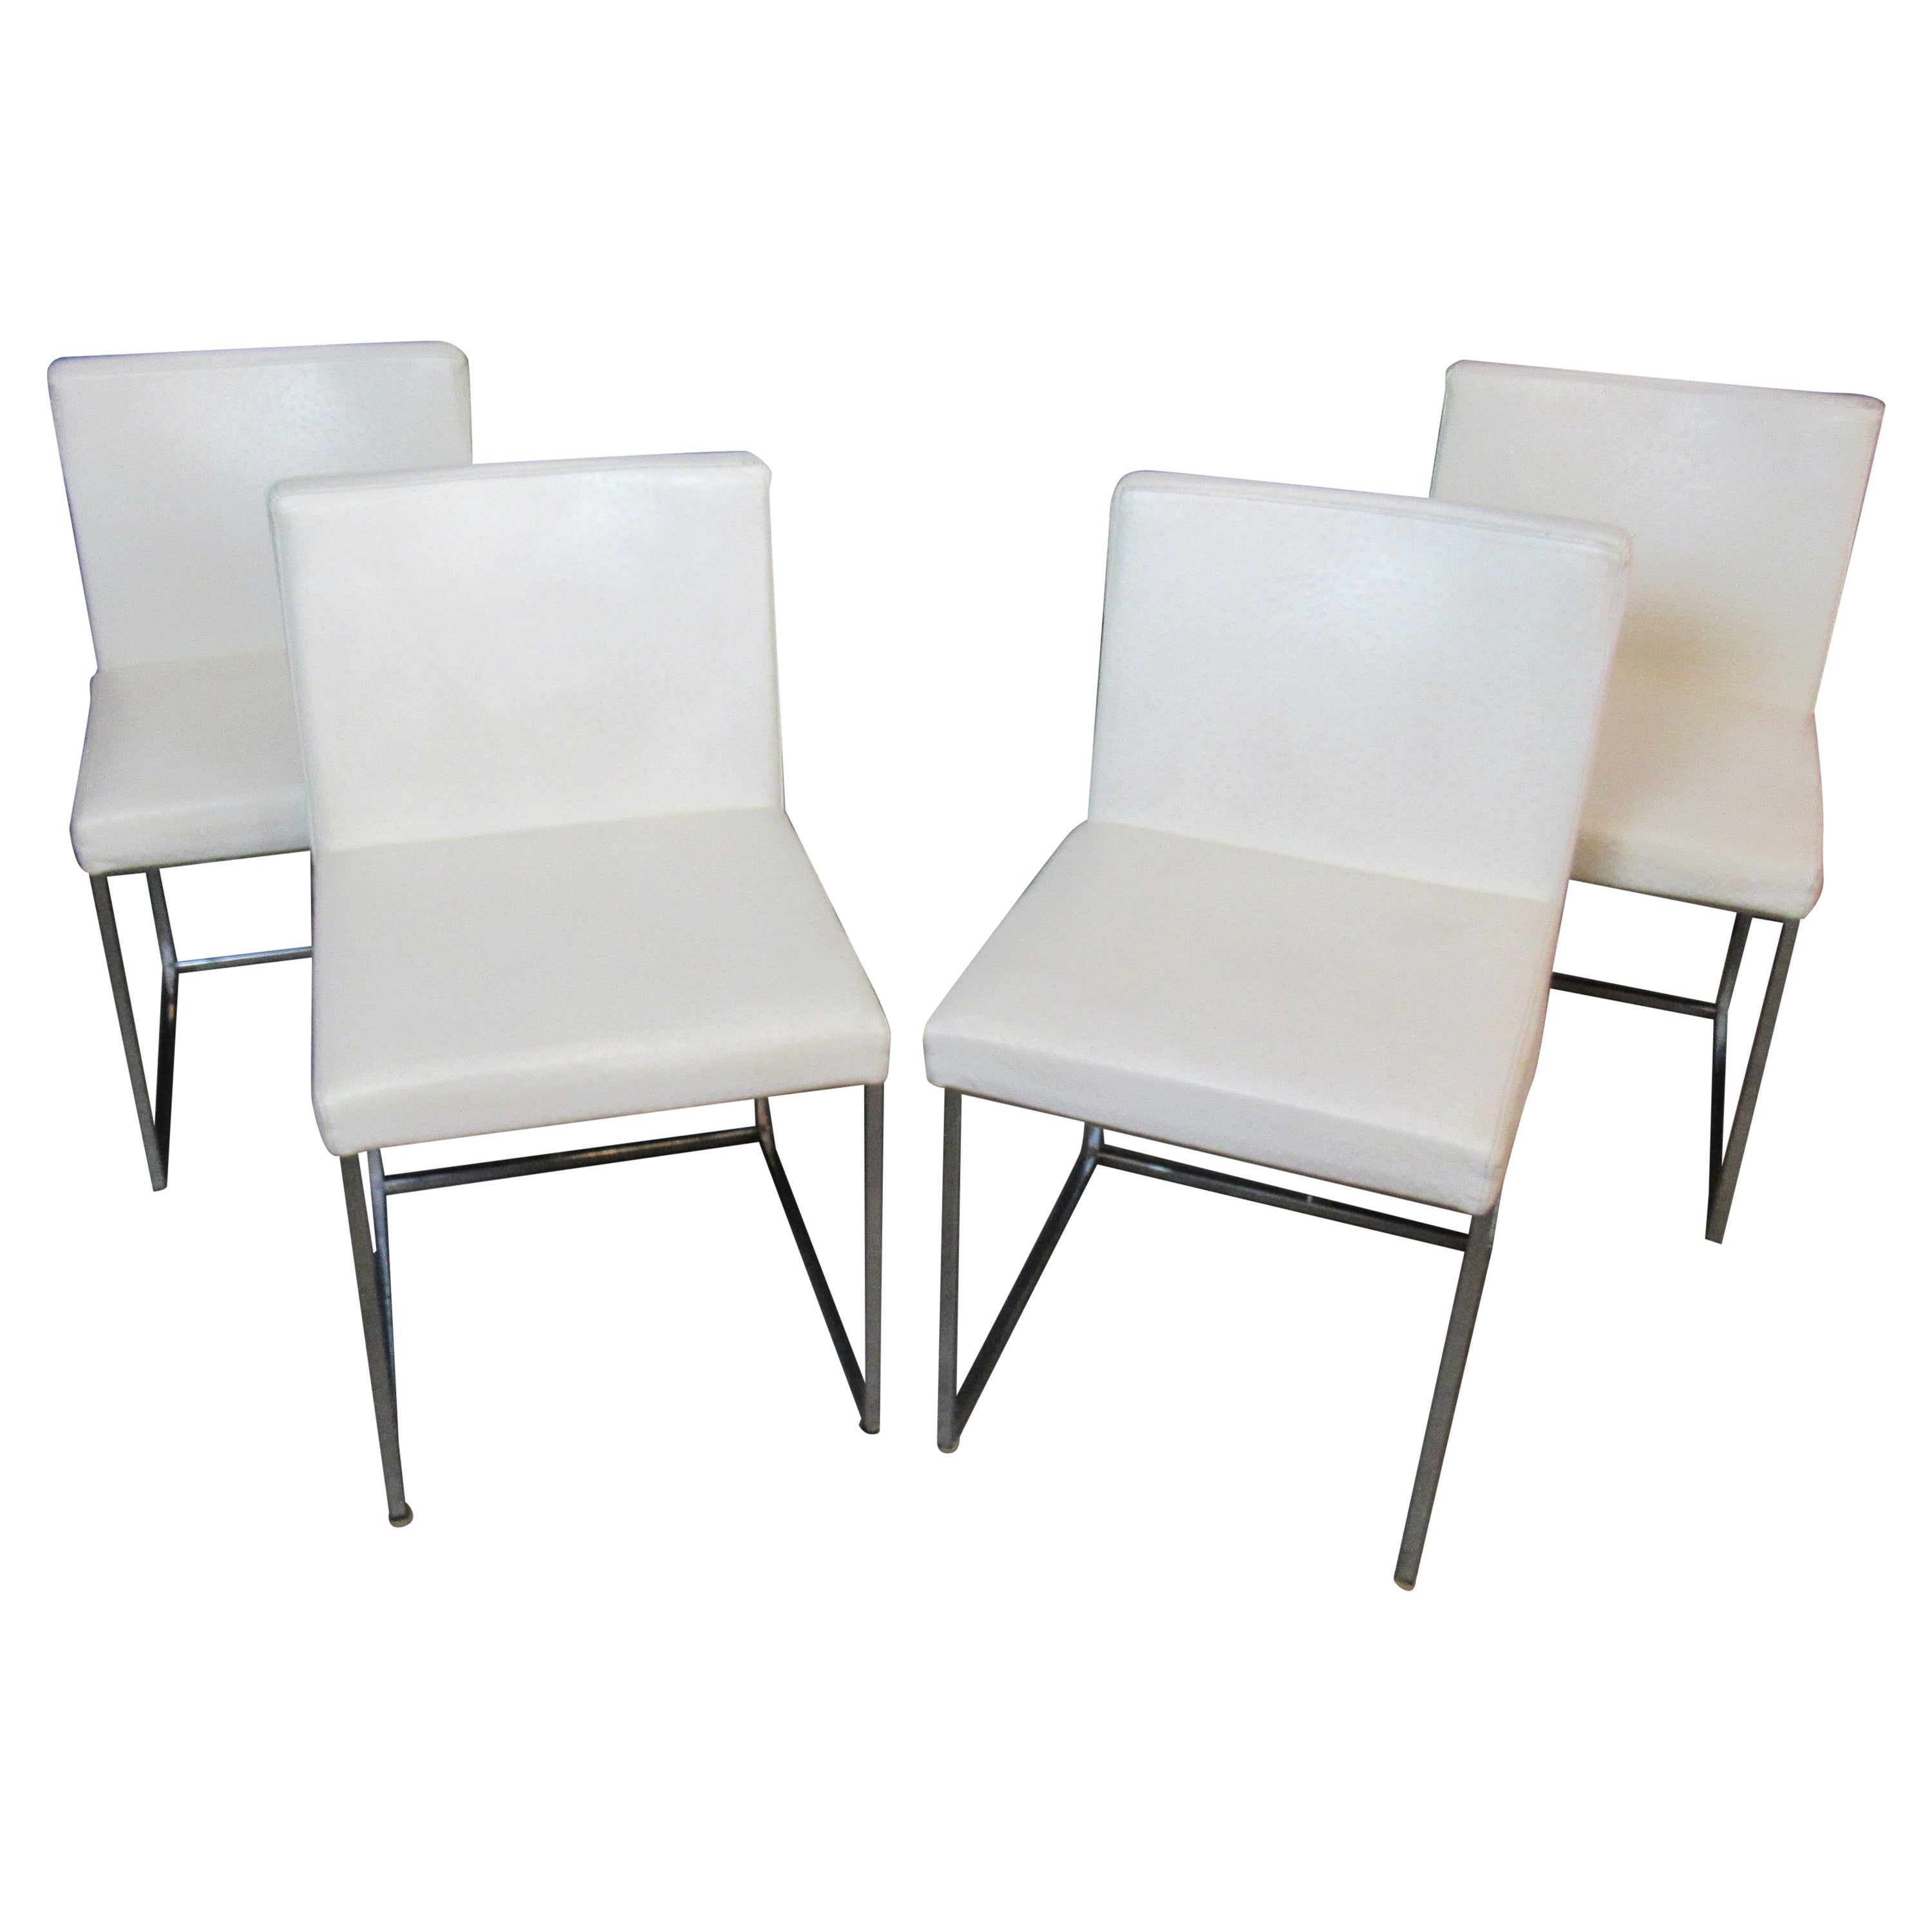 Four Ostrich Leather Dining Chairs by Calligaris For Sale